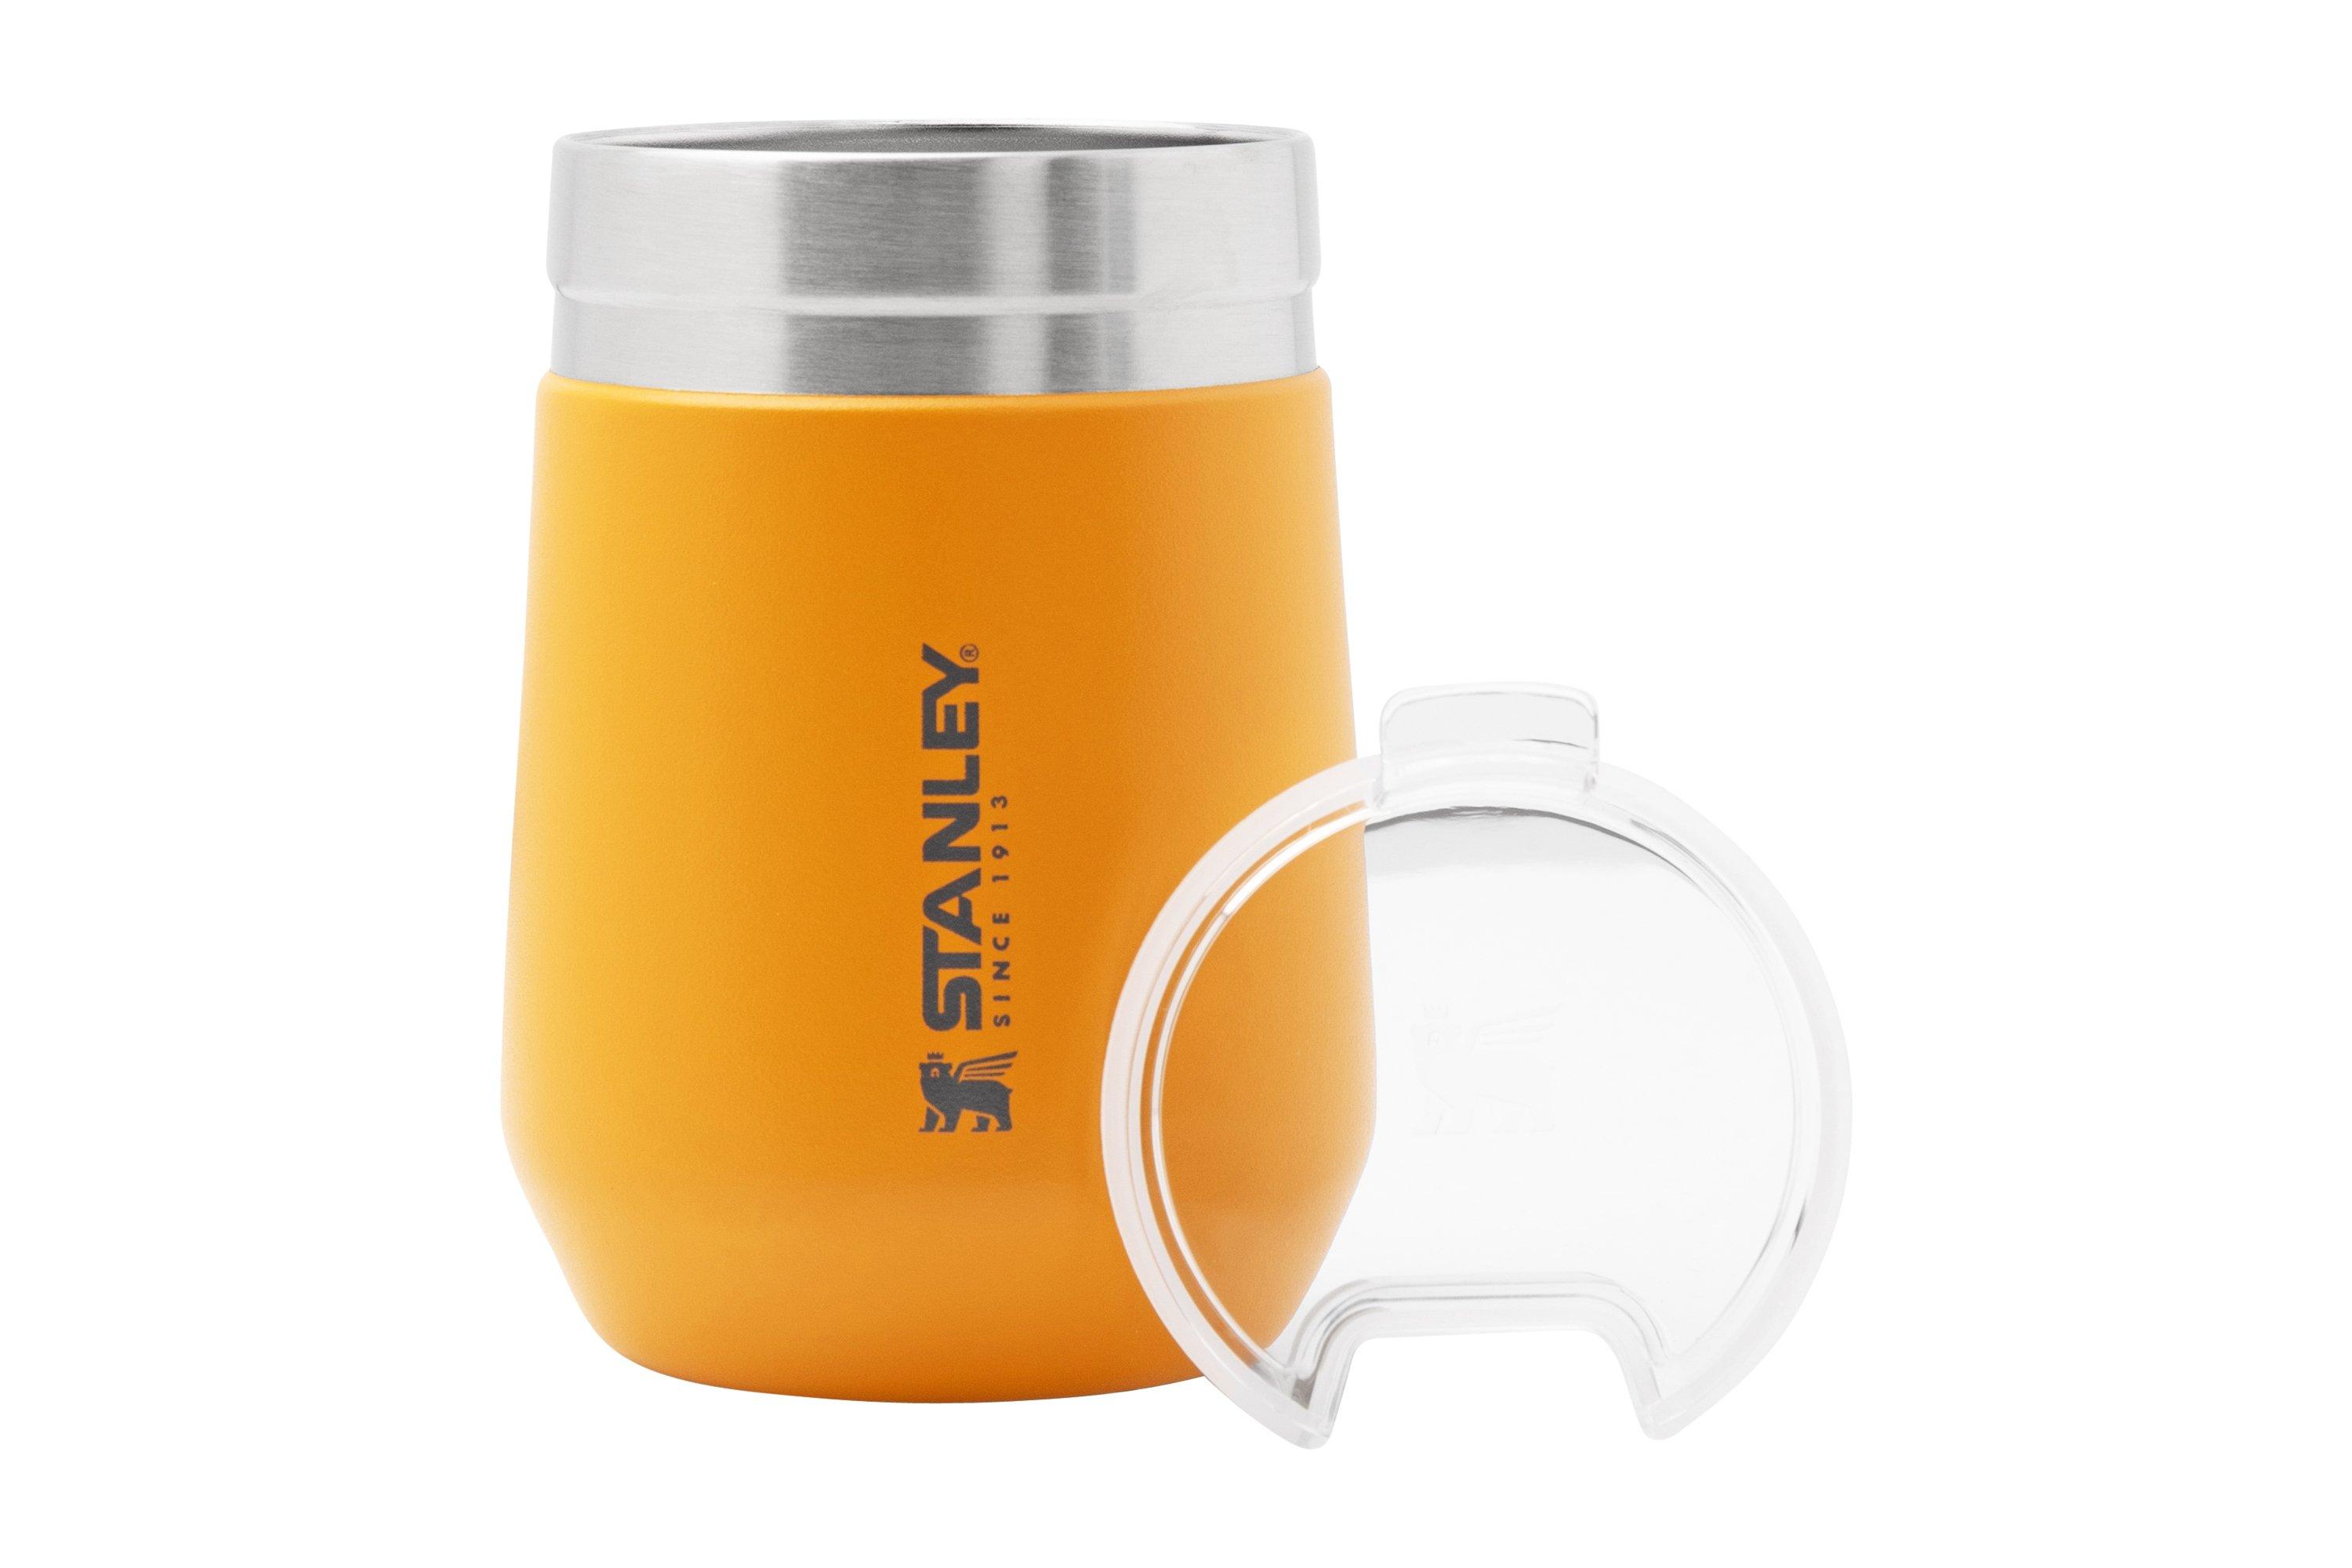 Stanley The Everyday GO Tumbler 290 mL, Shale, thermos